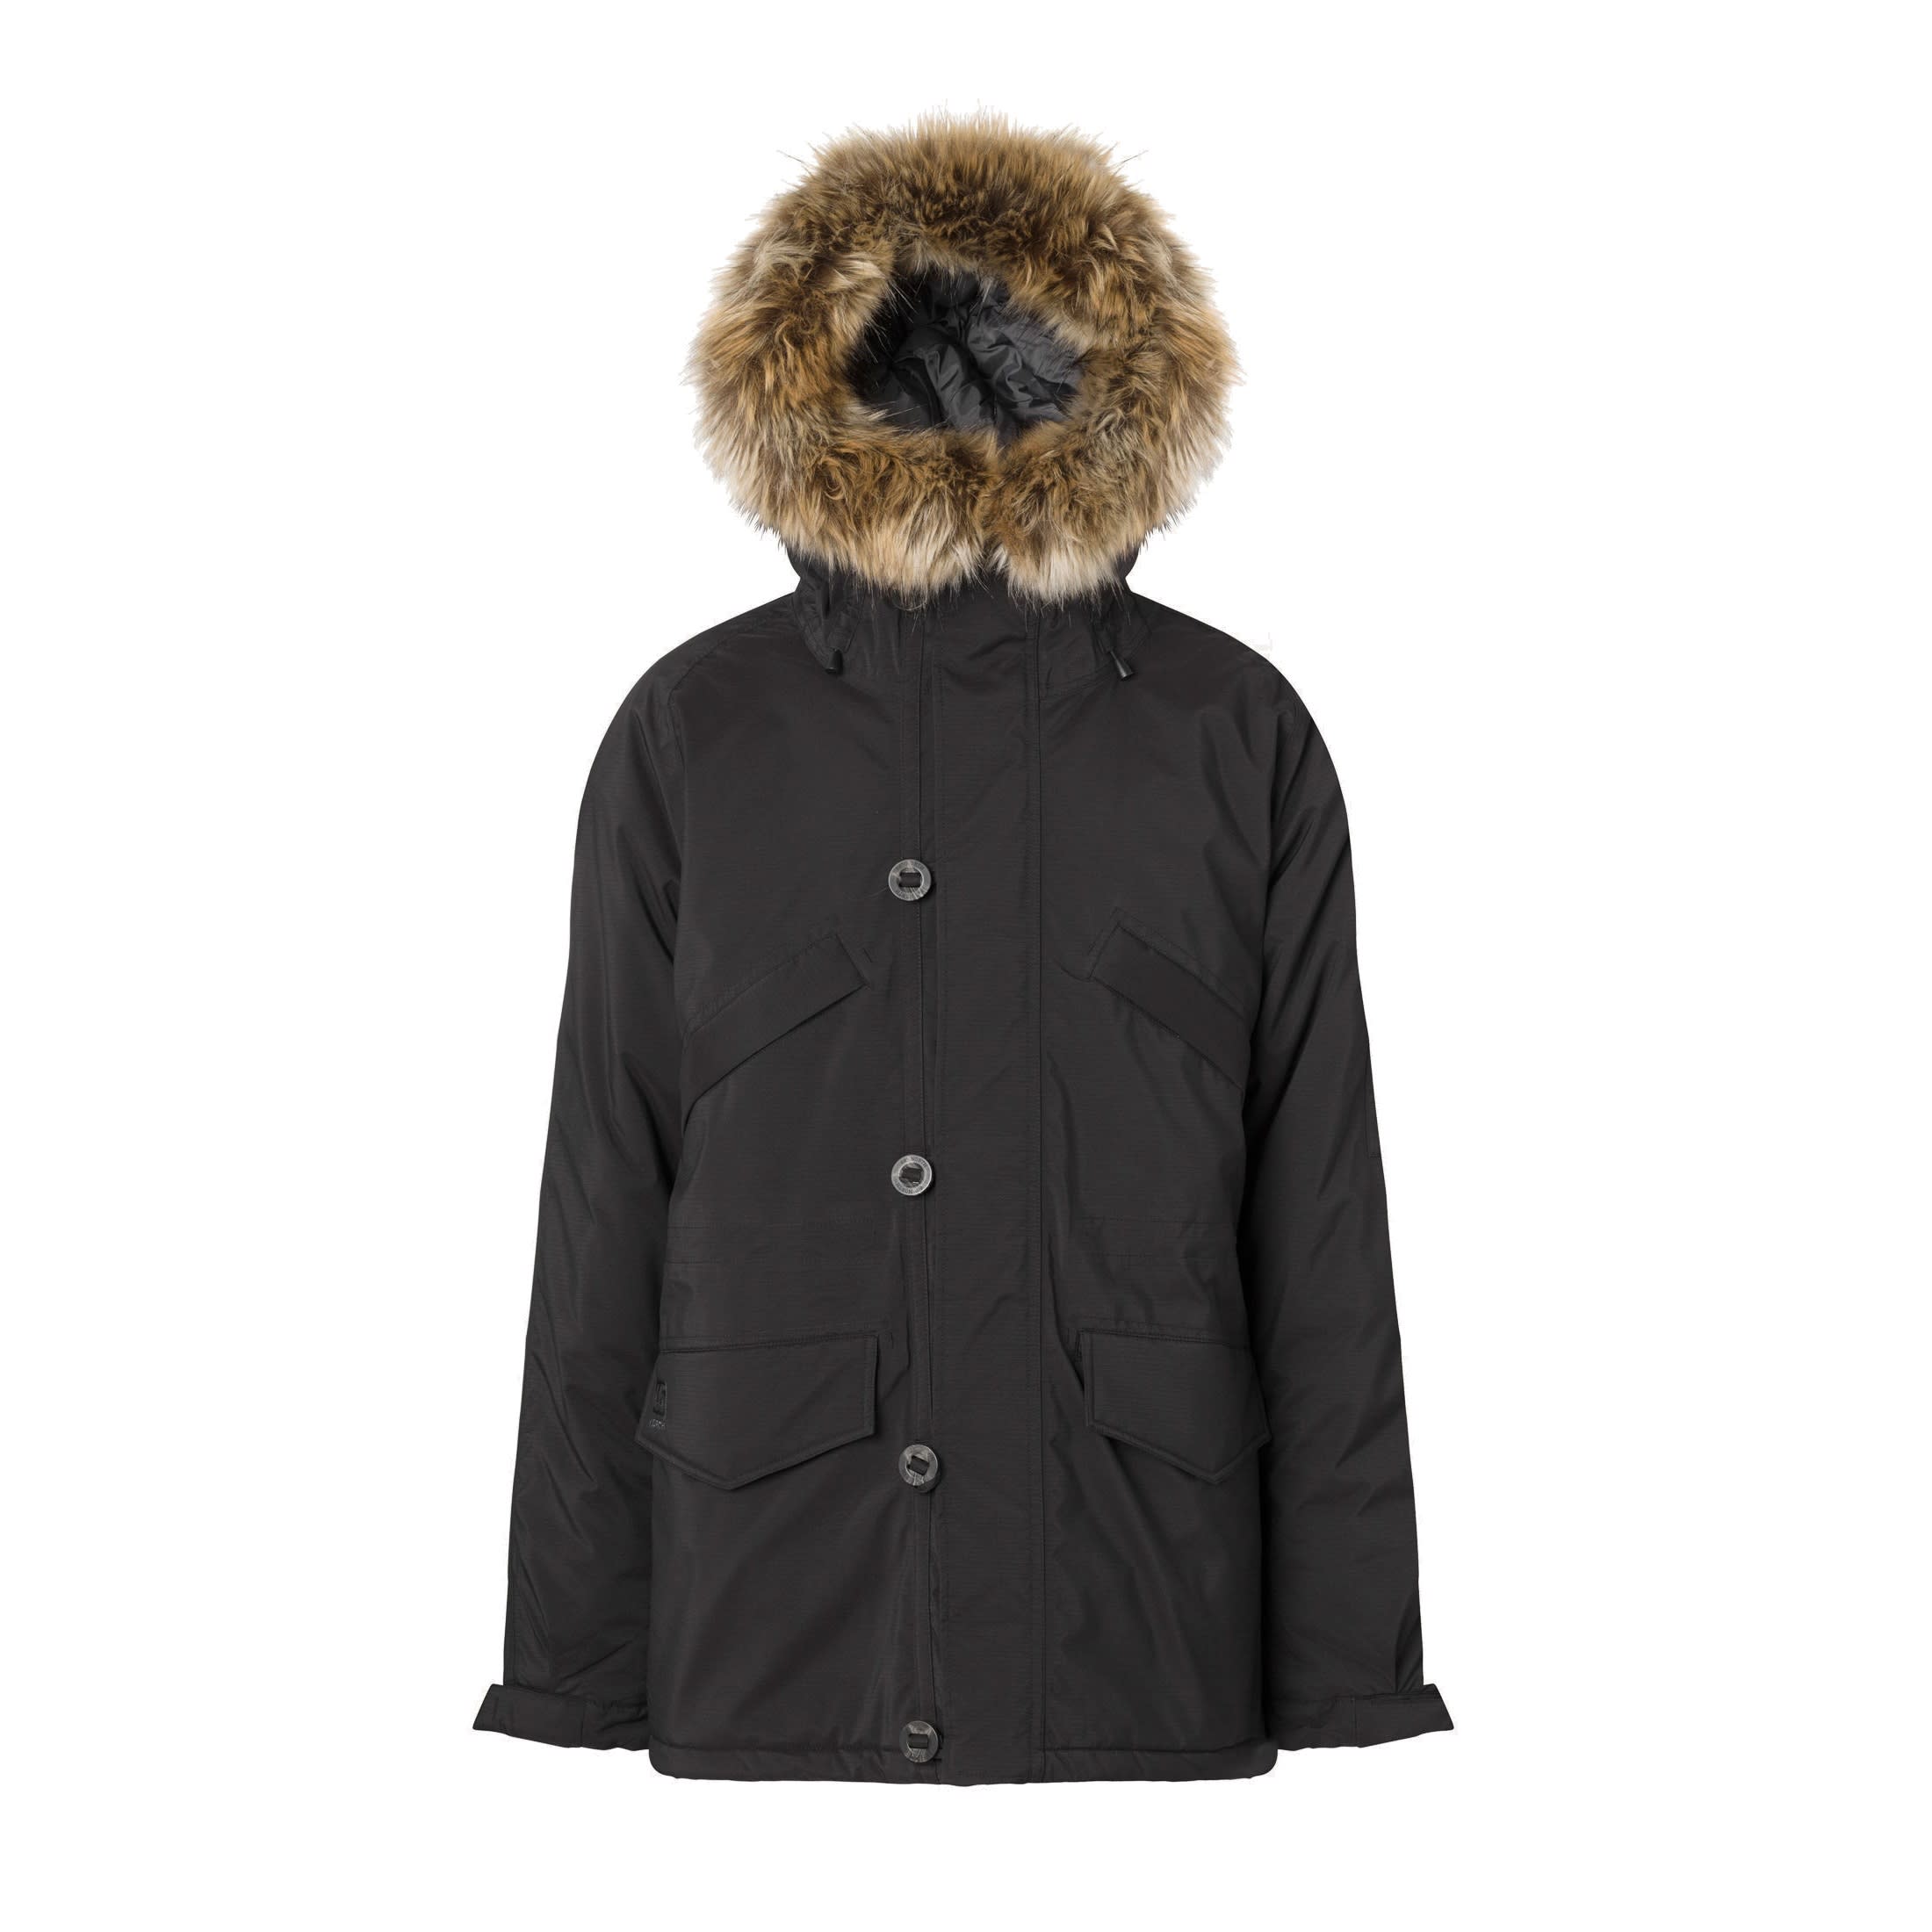 Buy 66 North Men's Snaefell Parka from 